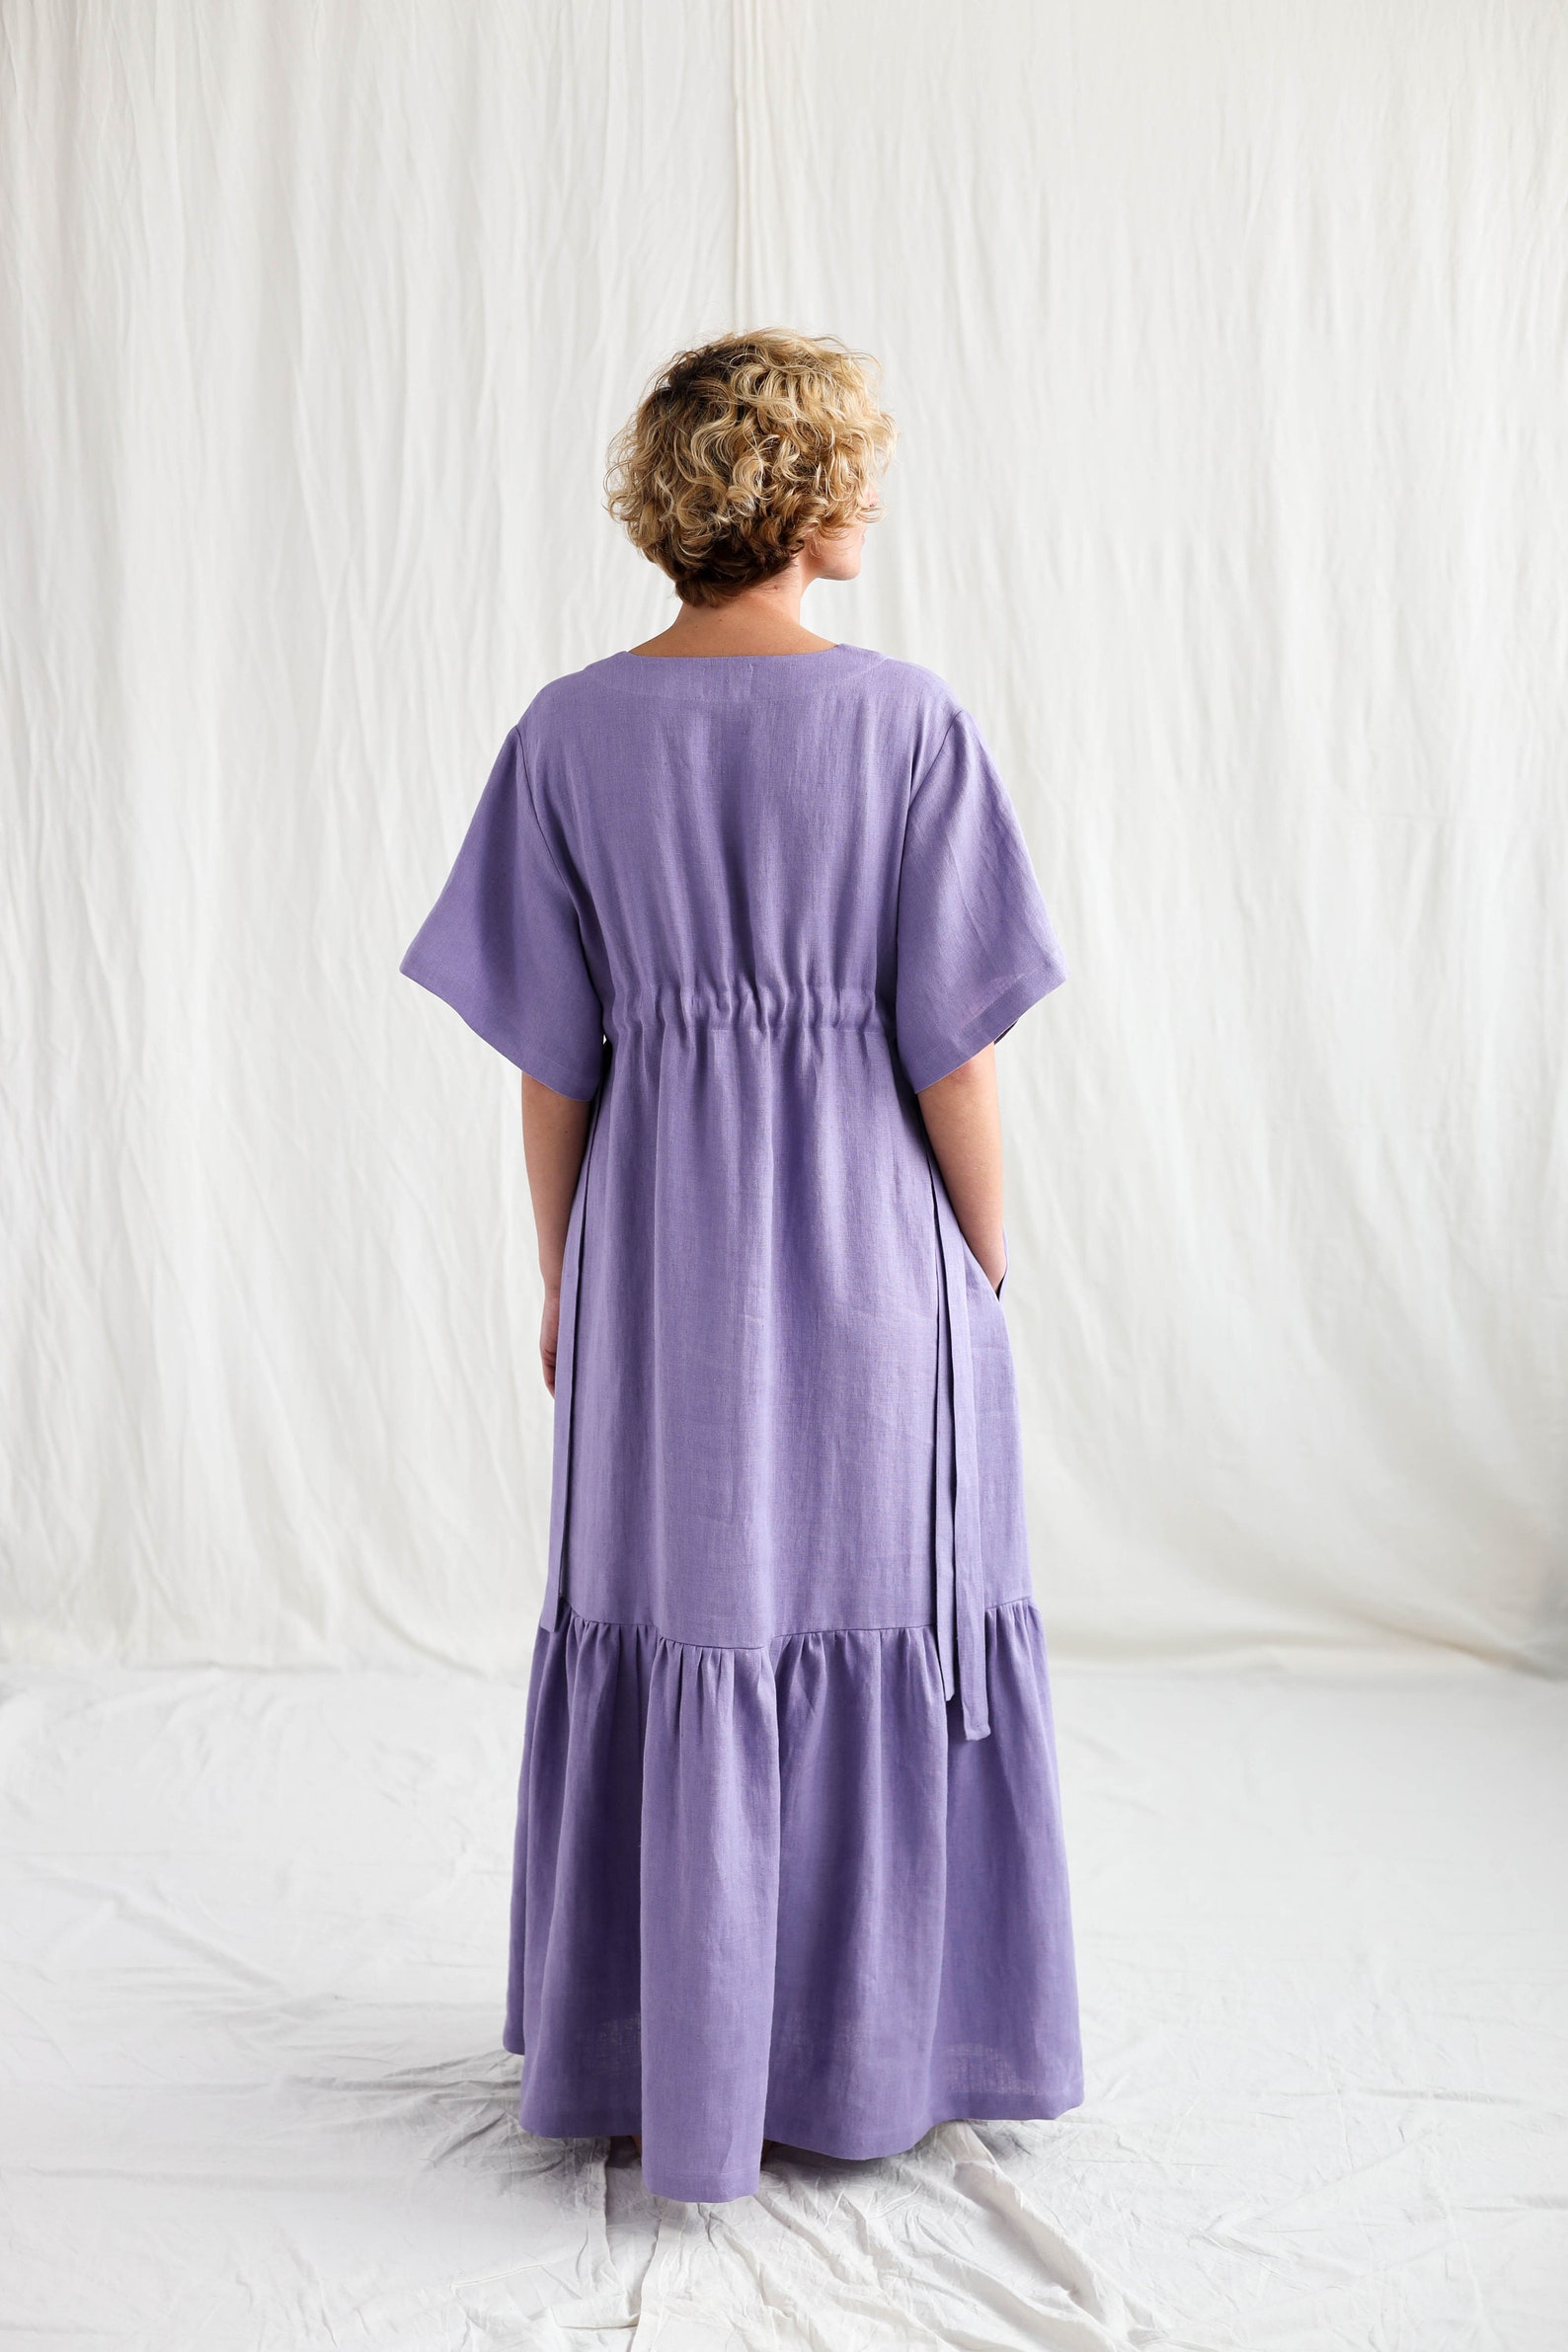 Lavender Linen Maxi Dress With Adjustable Waist Ties OFFON - Etsy